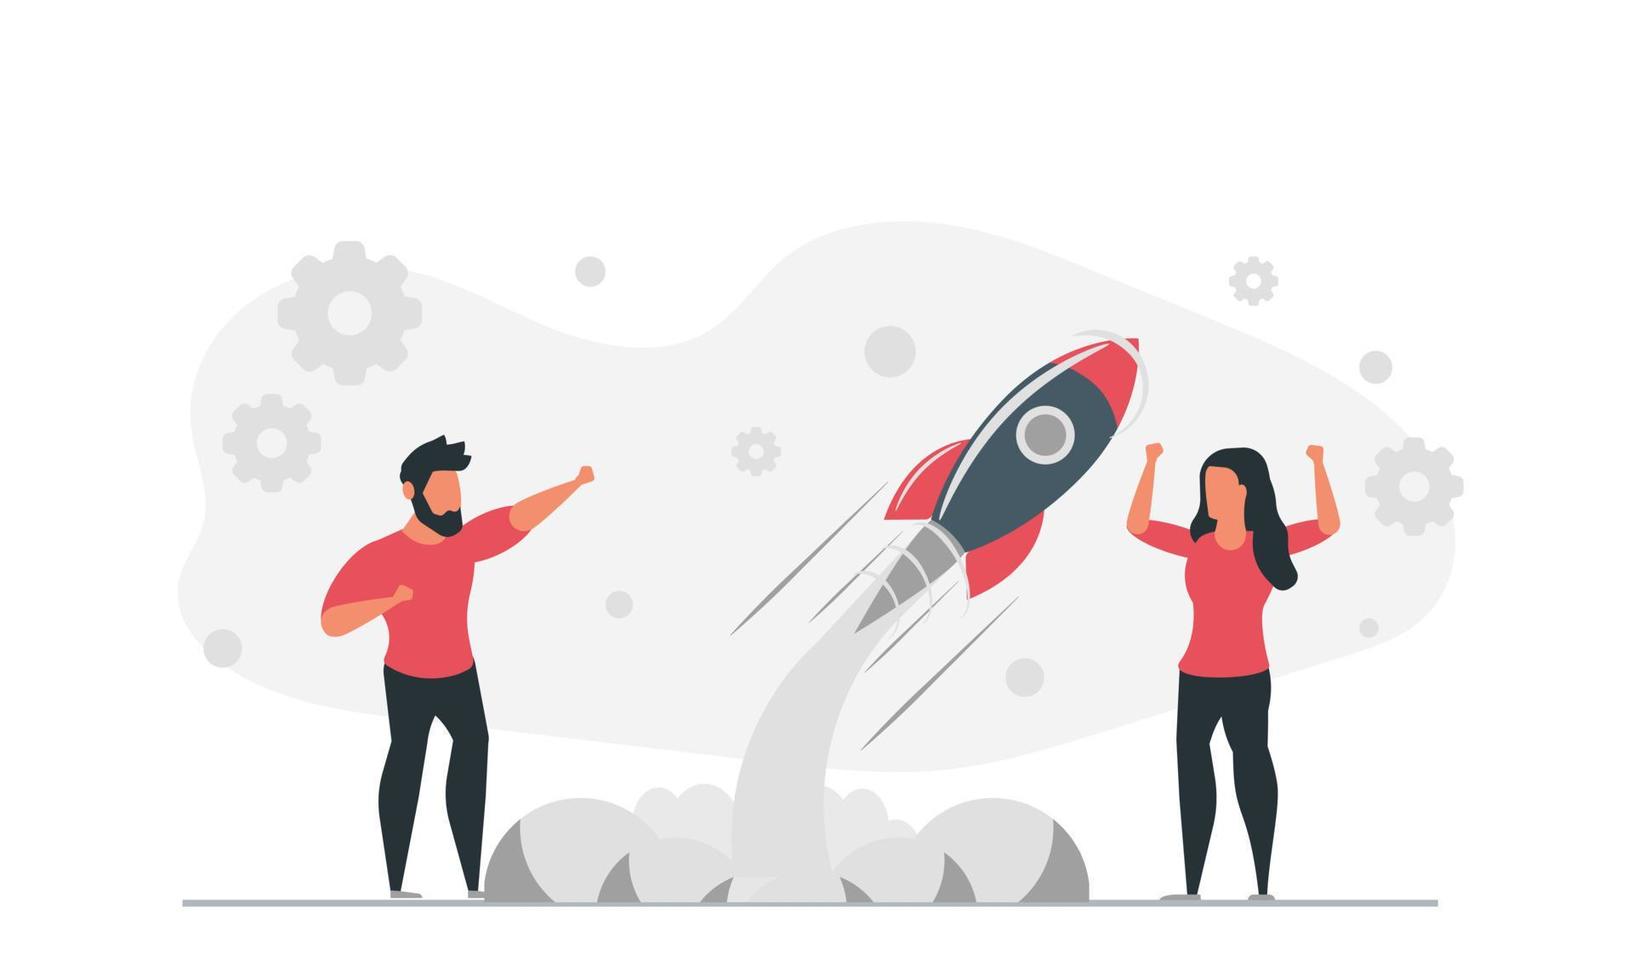 Life of a startup man and woman launch a rocket together. People together develop innovative business product to market concept vector illustration